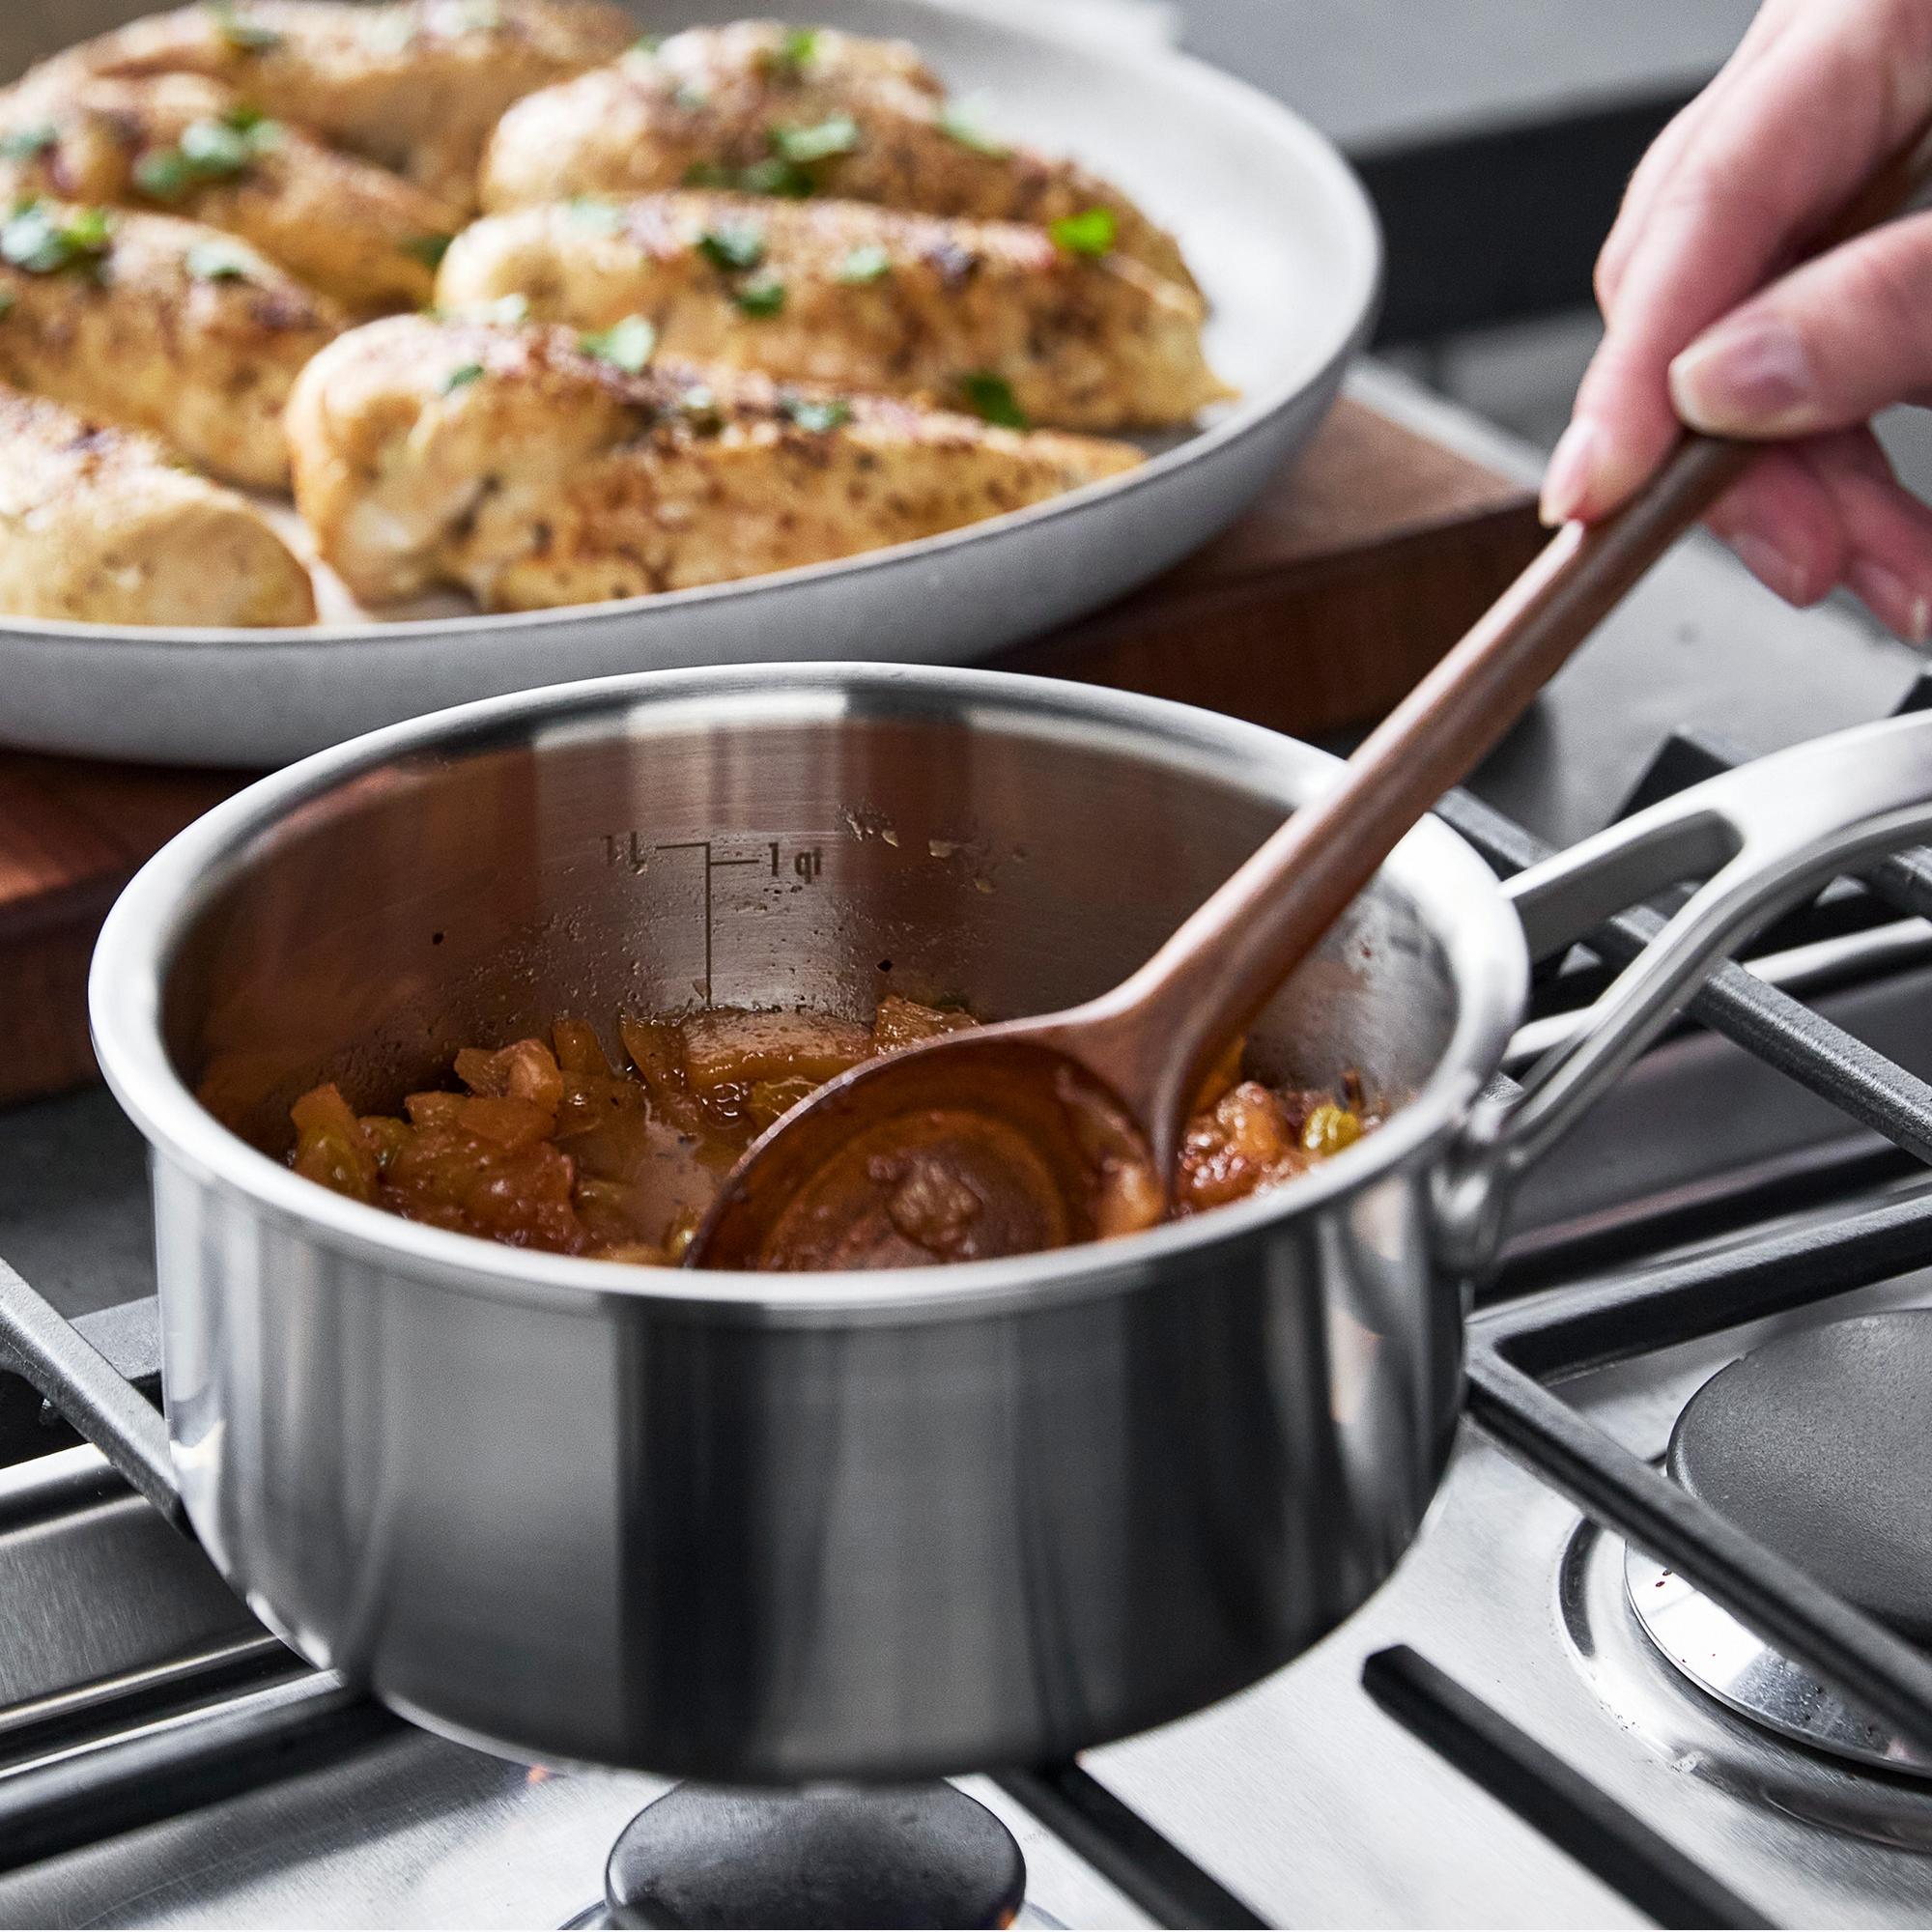 ALL-CLAD 1.5 QT SAUCEPAN WITH LID, D5 STAINLESS STEEL 5-PLY BONDED